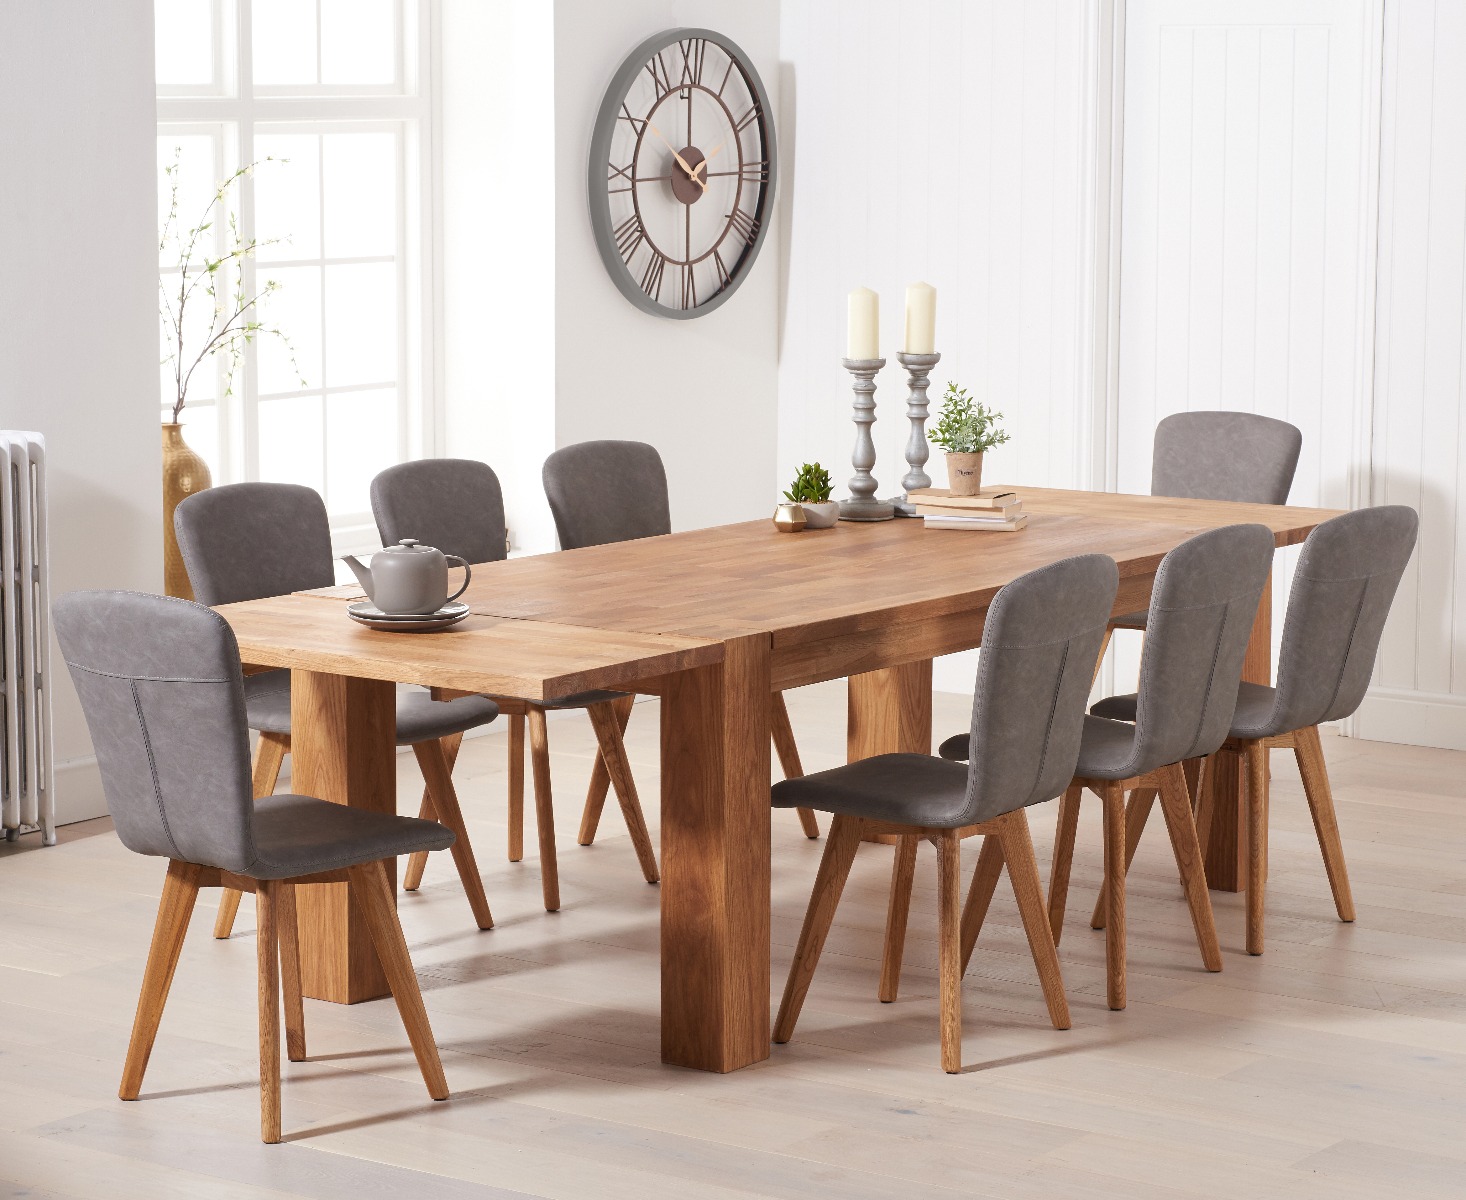 Extending Sheringham 200cm Solid Oak Table With 12 Grey Ruben Faux Leather Chairs